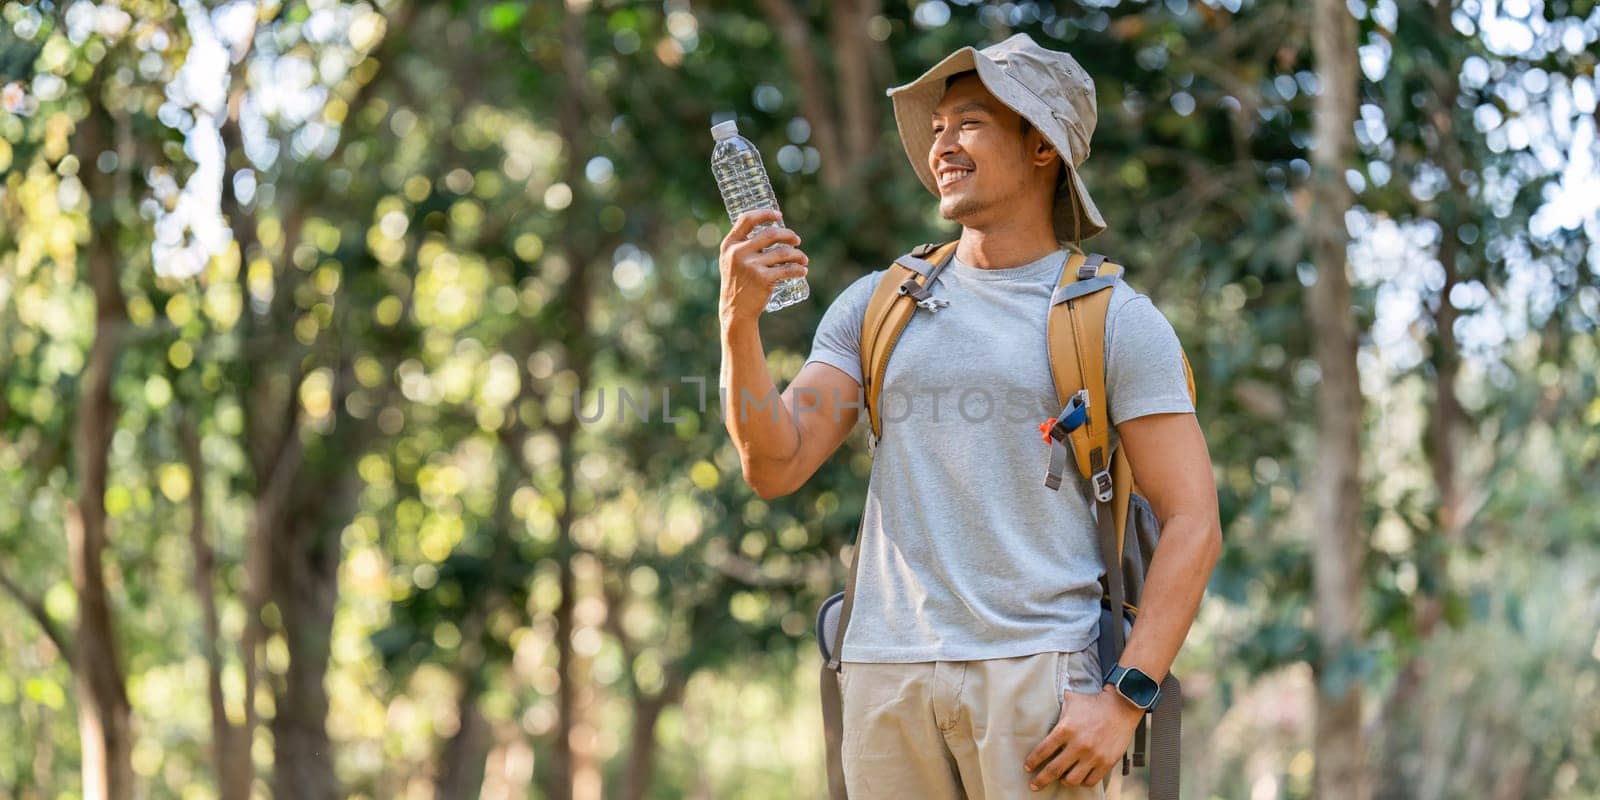 Young man backpacker traveling alone in forest. Attractive male traveler drinking water while walking in nature wood during holiday vacation trip.